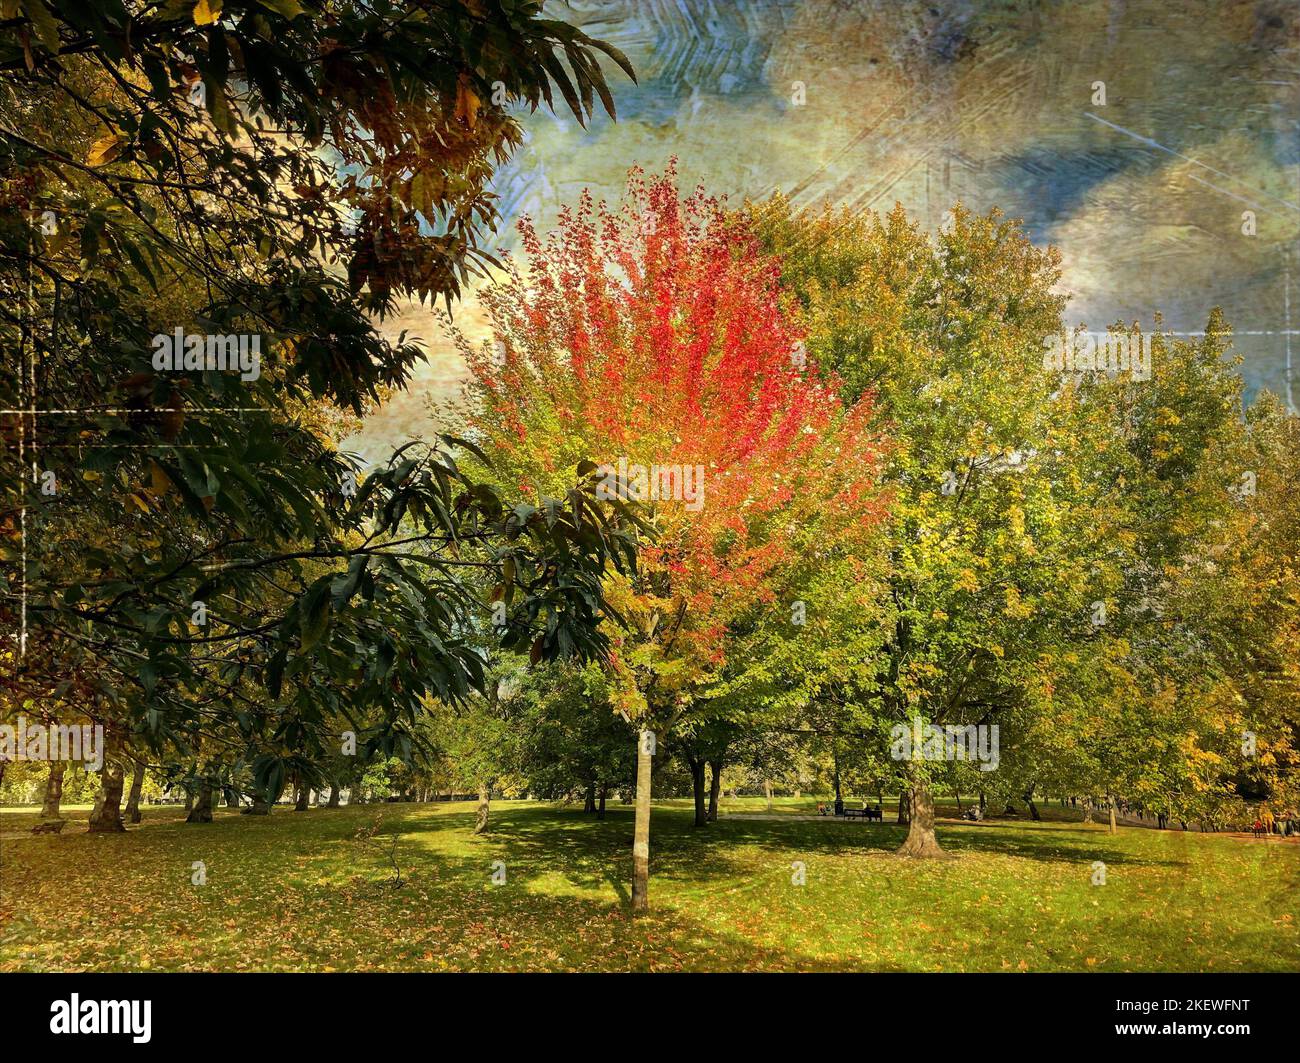 Autumnal London. Green Park. Creative digital artwork with distressed filter. Stock Photo